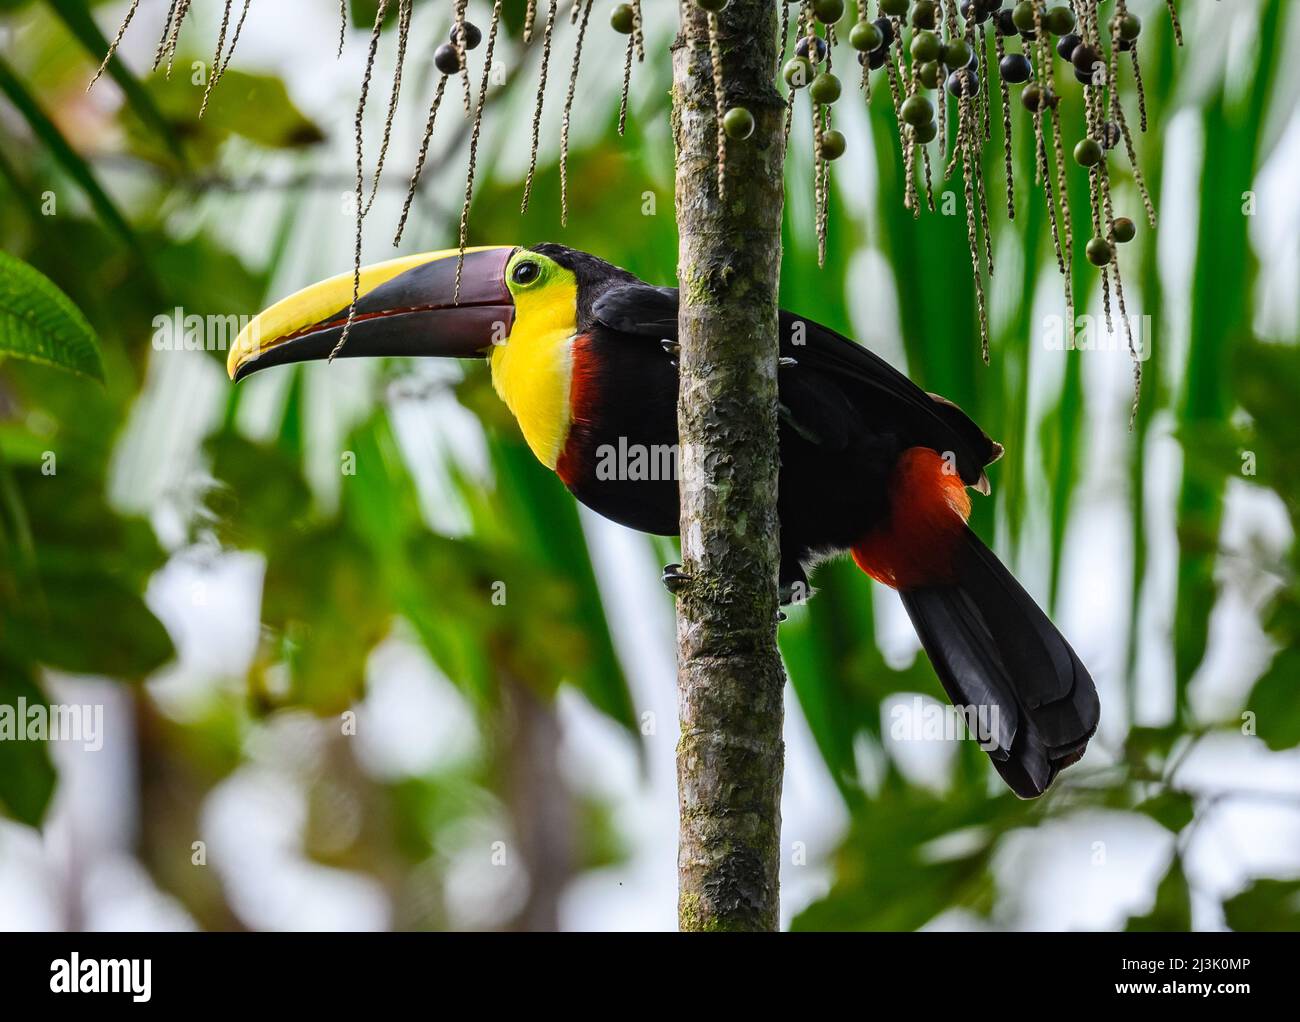 A Choco Toucan (Ramphastos brevis) perched on a palm tree. Colombia, South America. Stock Photo